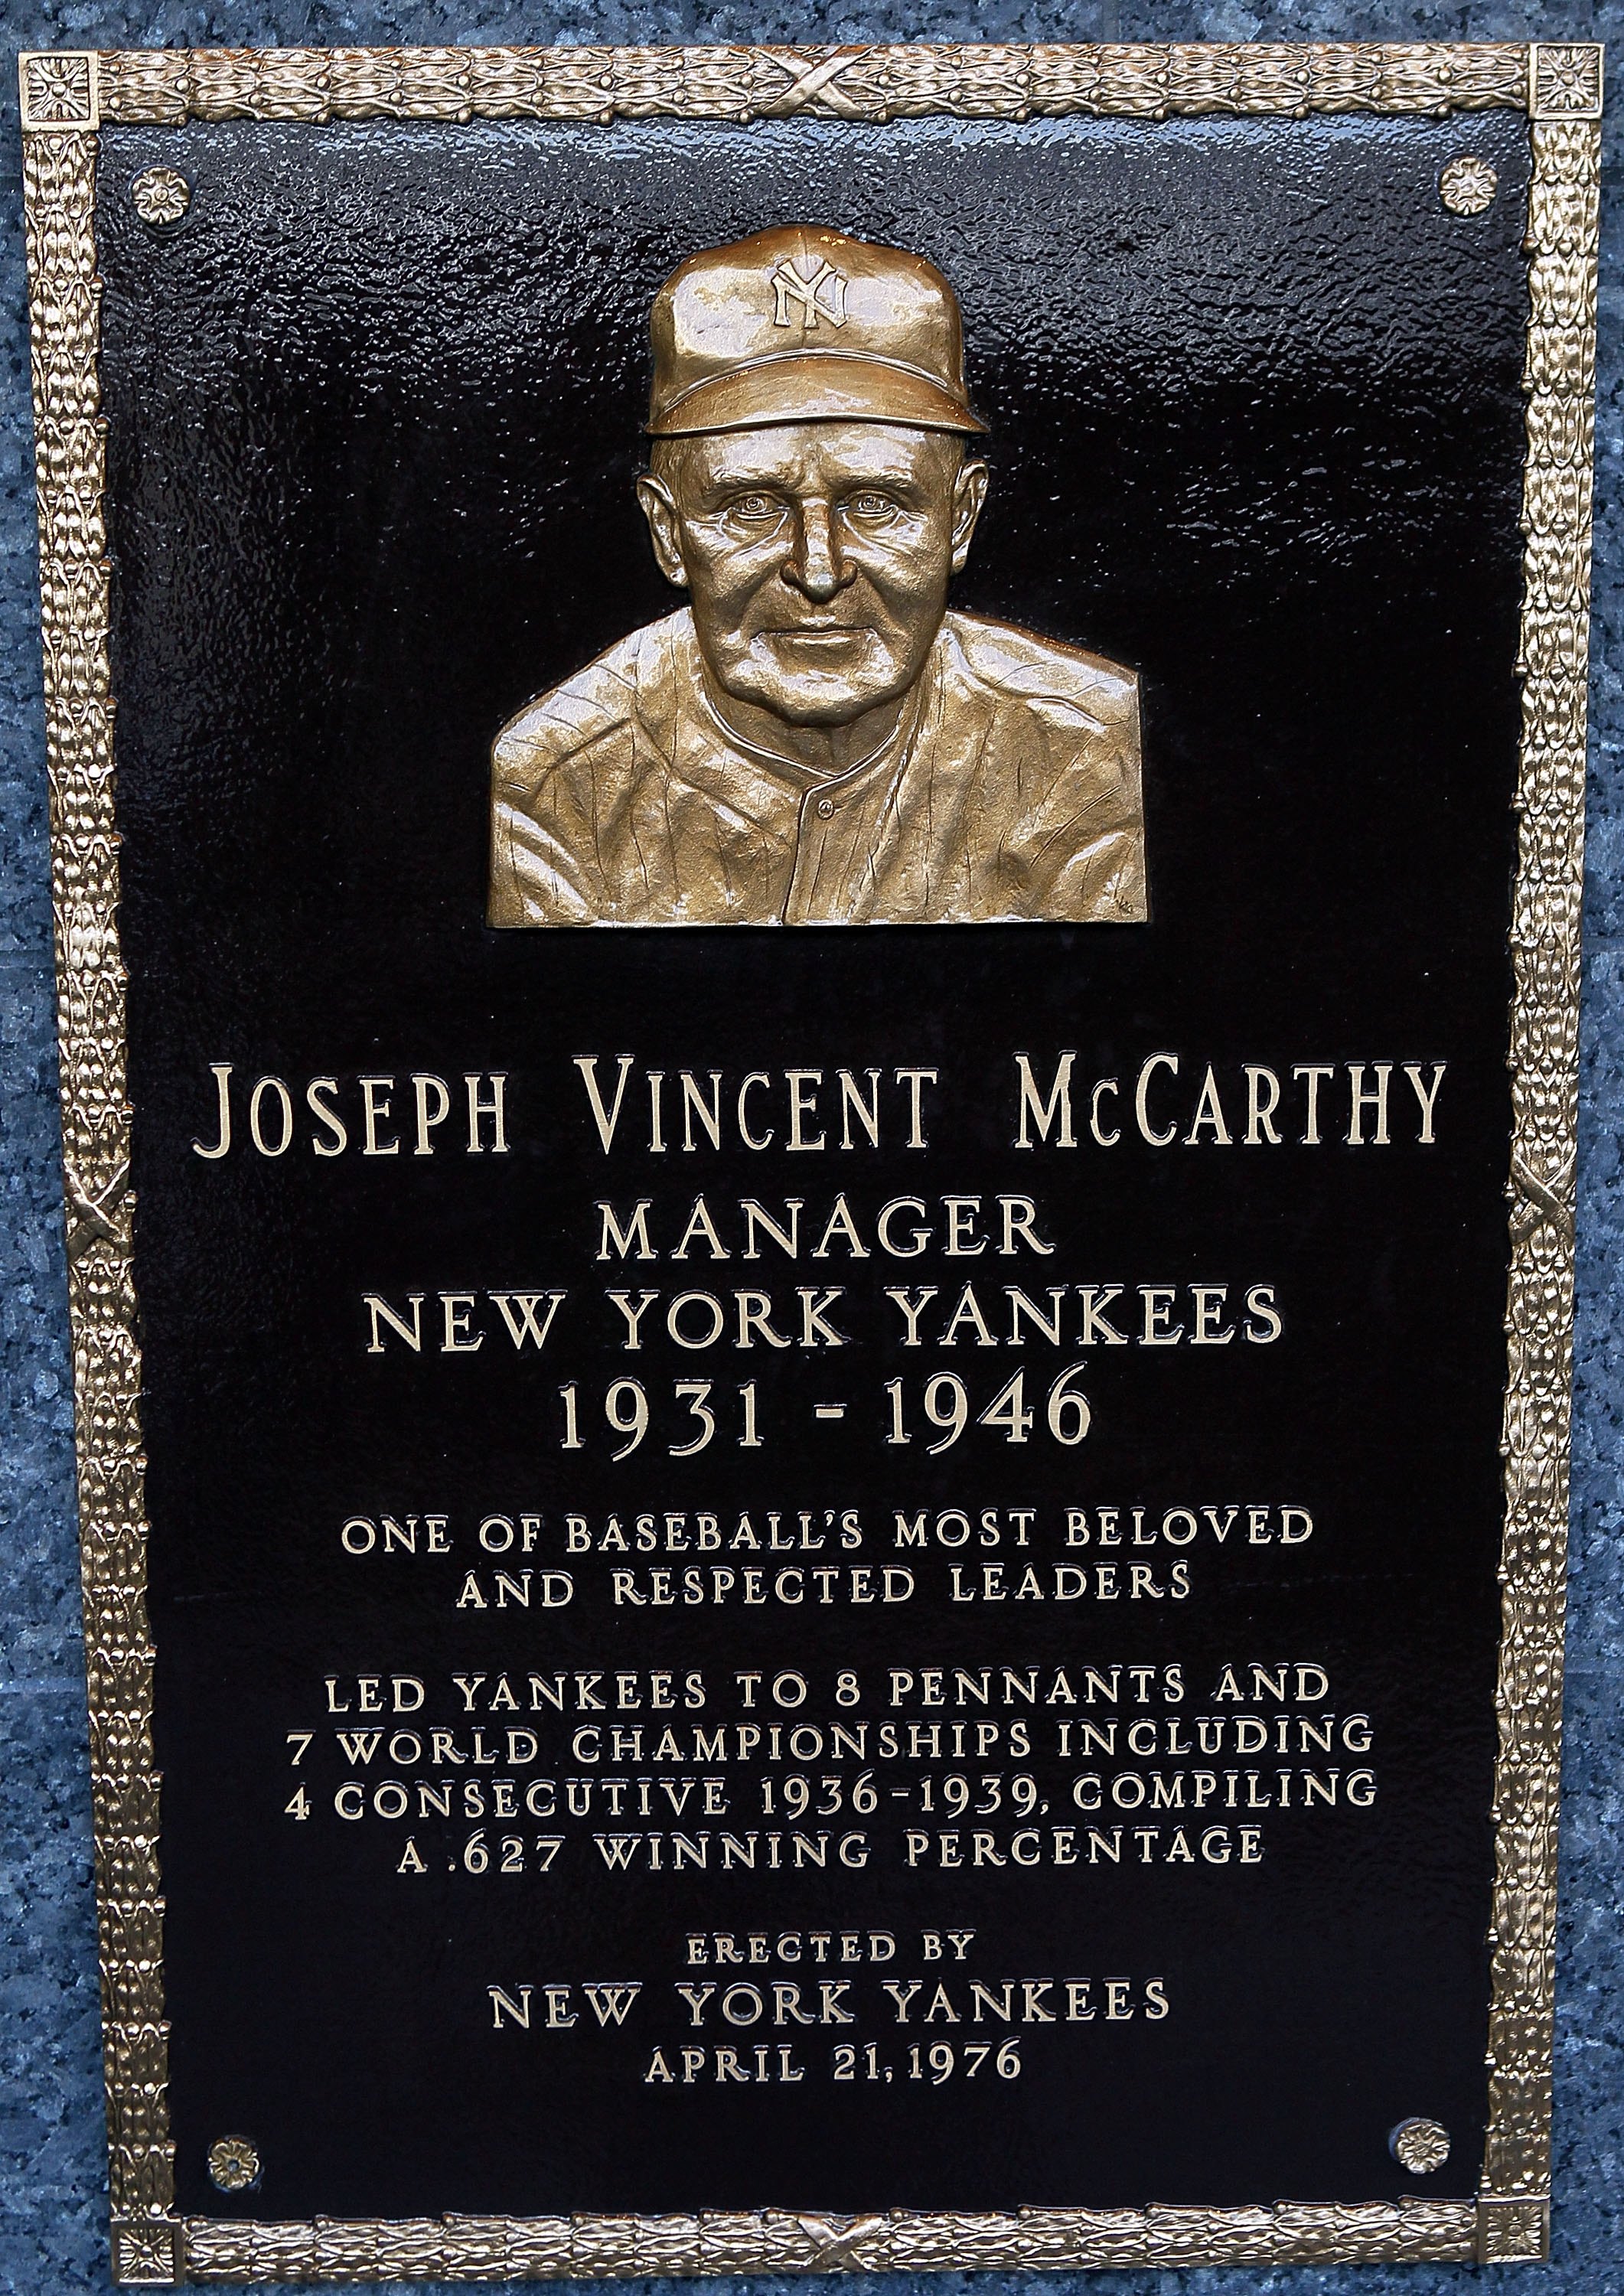 NEW YORK - MAY 02:  The plaque of Joe McCarthy is seen in Monument Park at Yankee Stadium prior to the game between the New York Yankees and the Chicago White Sox on May 2, 2010 in the Bronx borough of New York City. The Yankees defeated the White Sox 12-